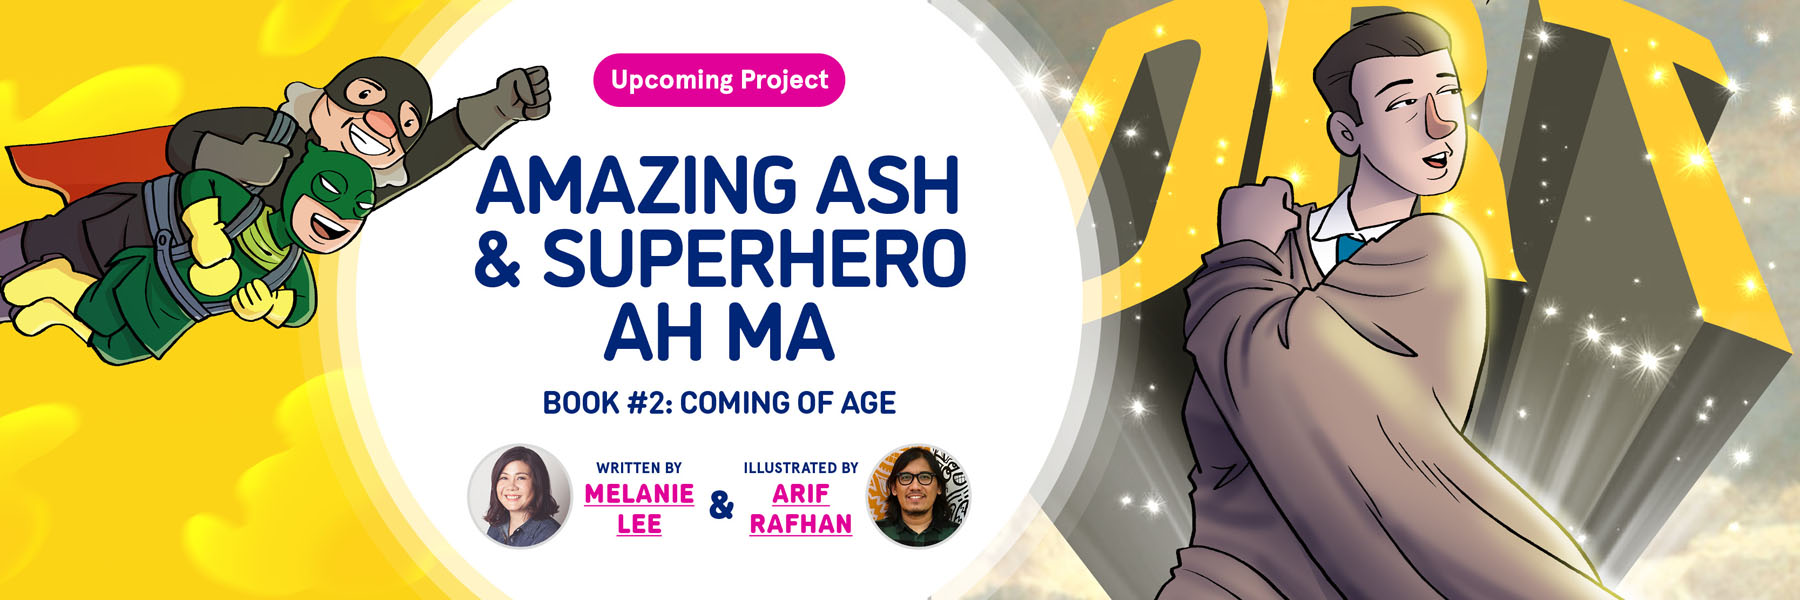 Upcoming Project for Amazing Ash and Superhero Ah Ma 